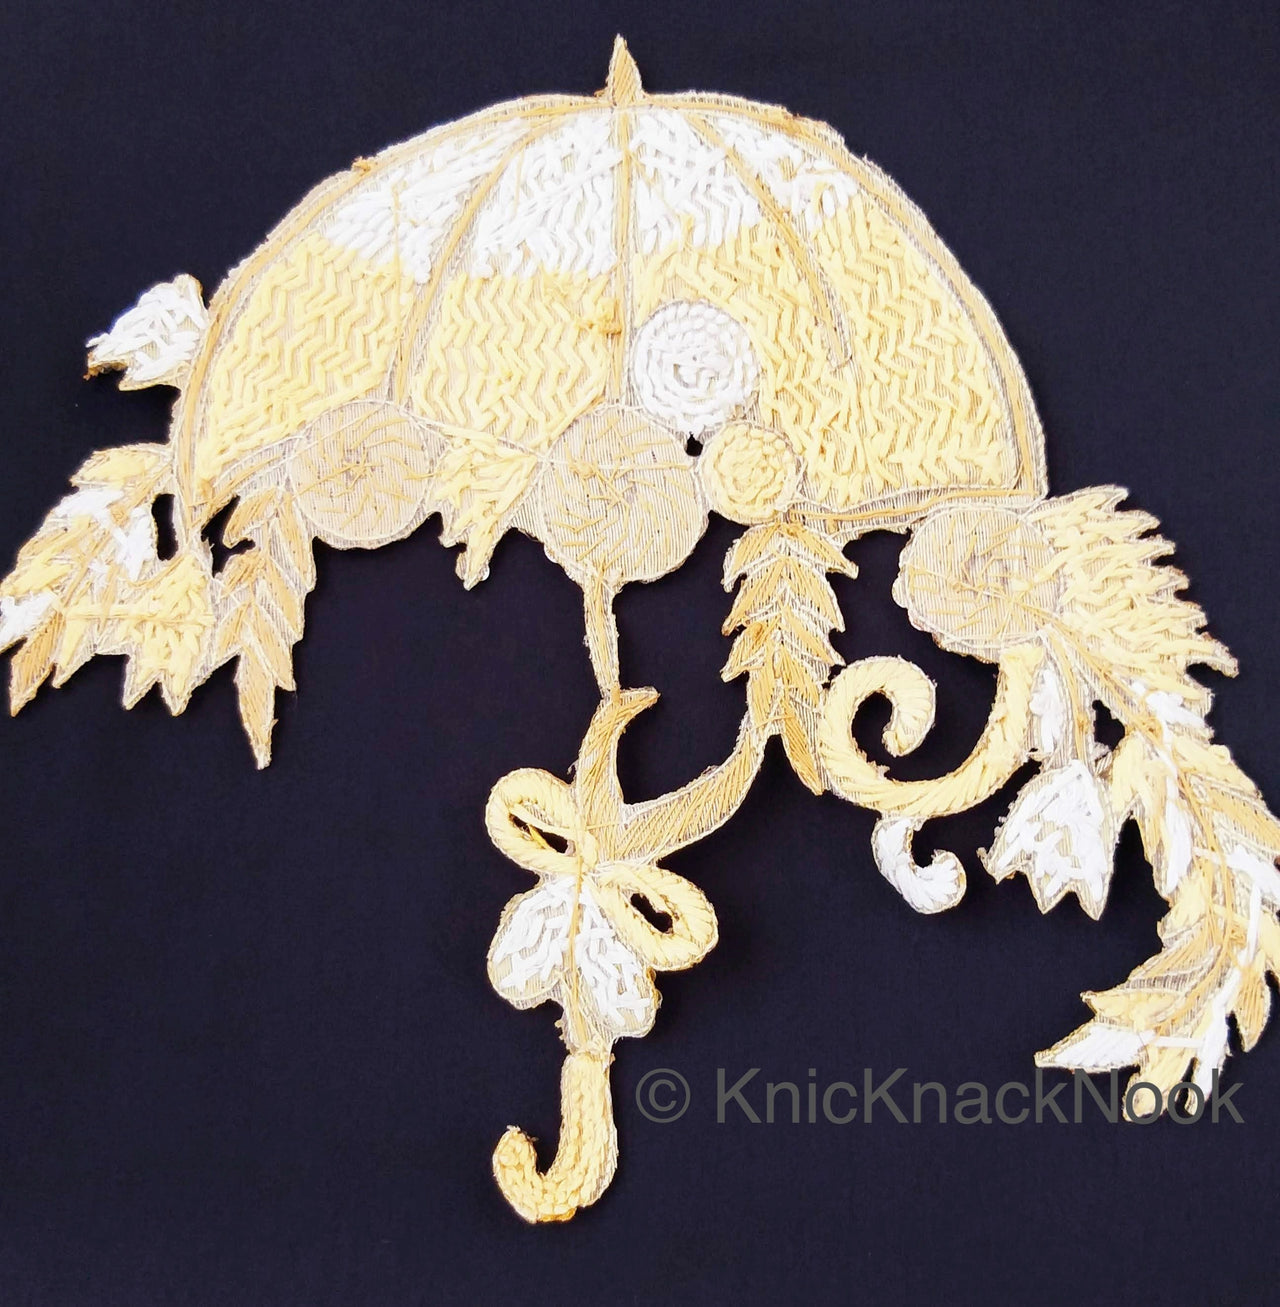 Hand Embroidered Umbrella Applique With Zardozi And Gold Sequins Embroidery, Appliqué Patch, Beige Indian Motif